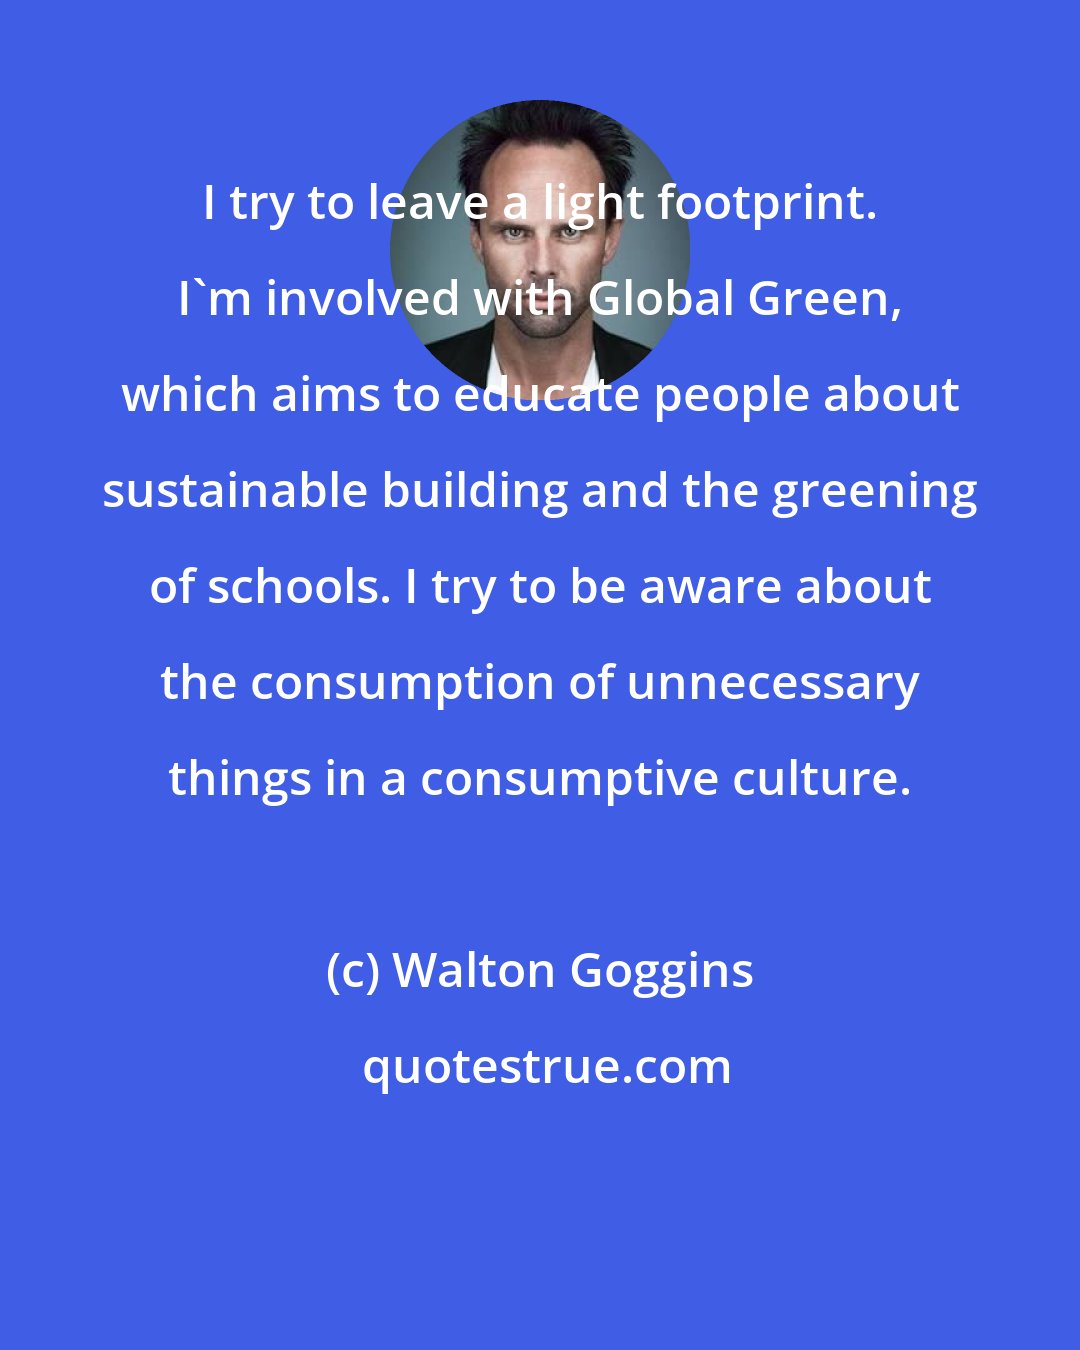 Walton Goggins: I try to leave a light footprint. I'm involved with Global Green, which aims to educate people about sustainable building and the greening of schools. I try to be aware about the consumption of unnecessary things in a consumptive culture.